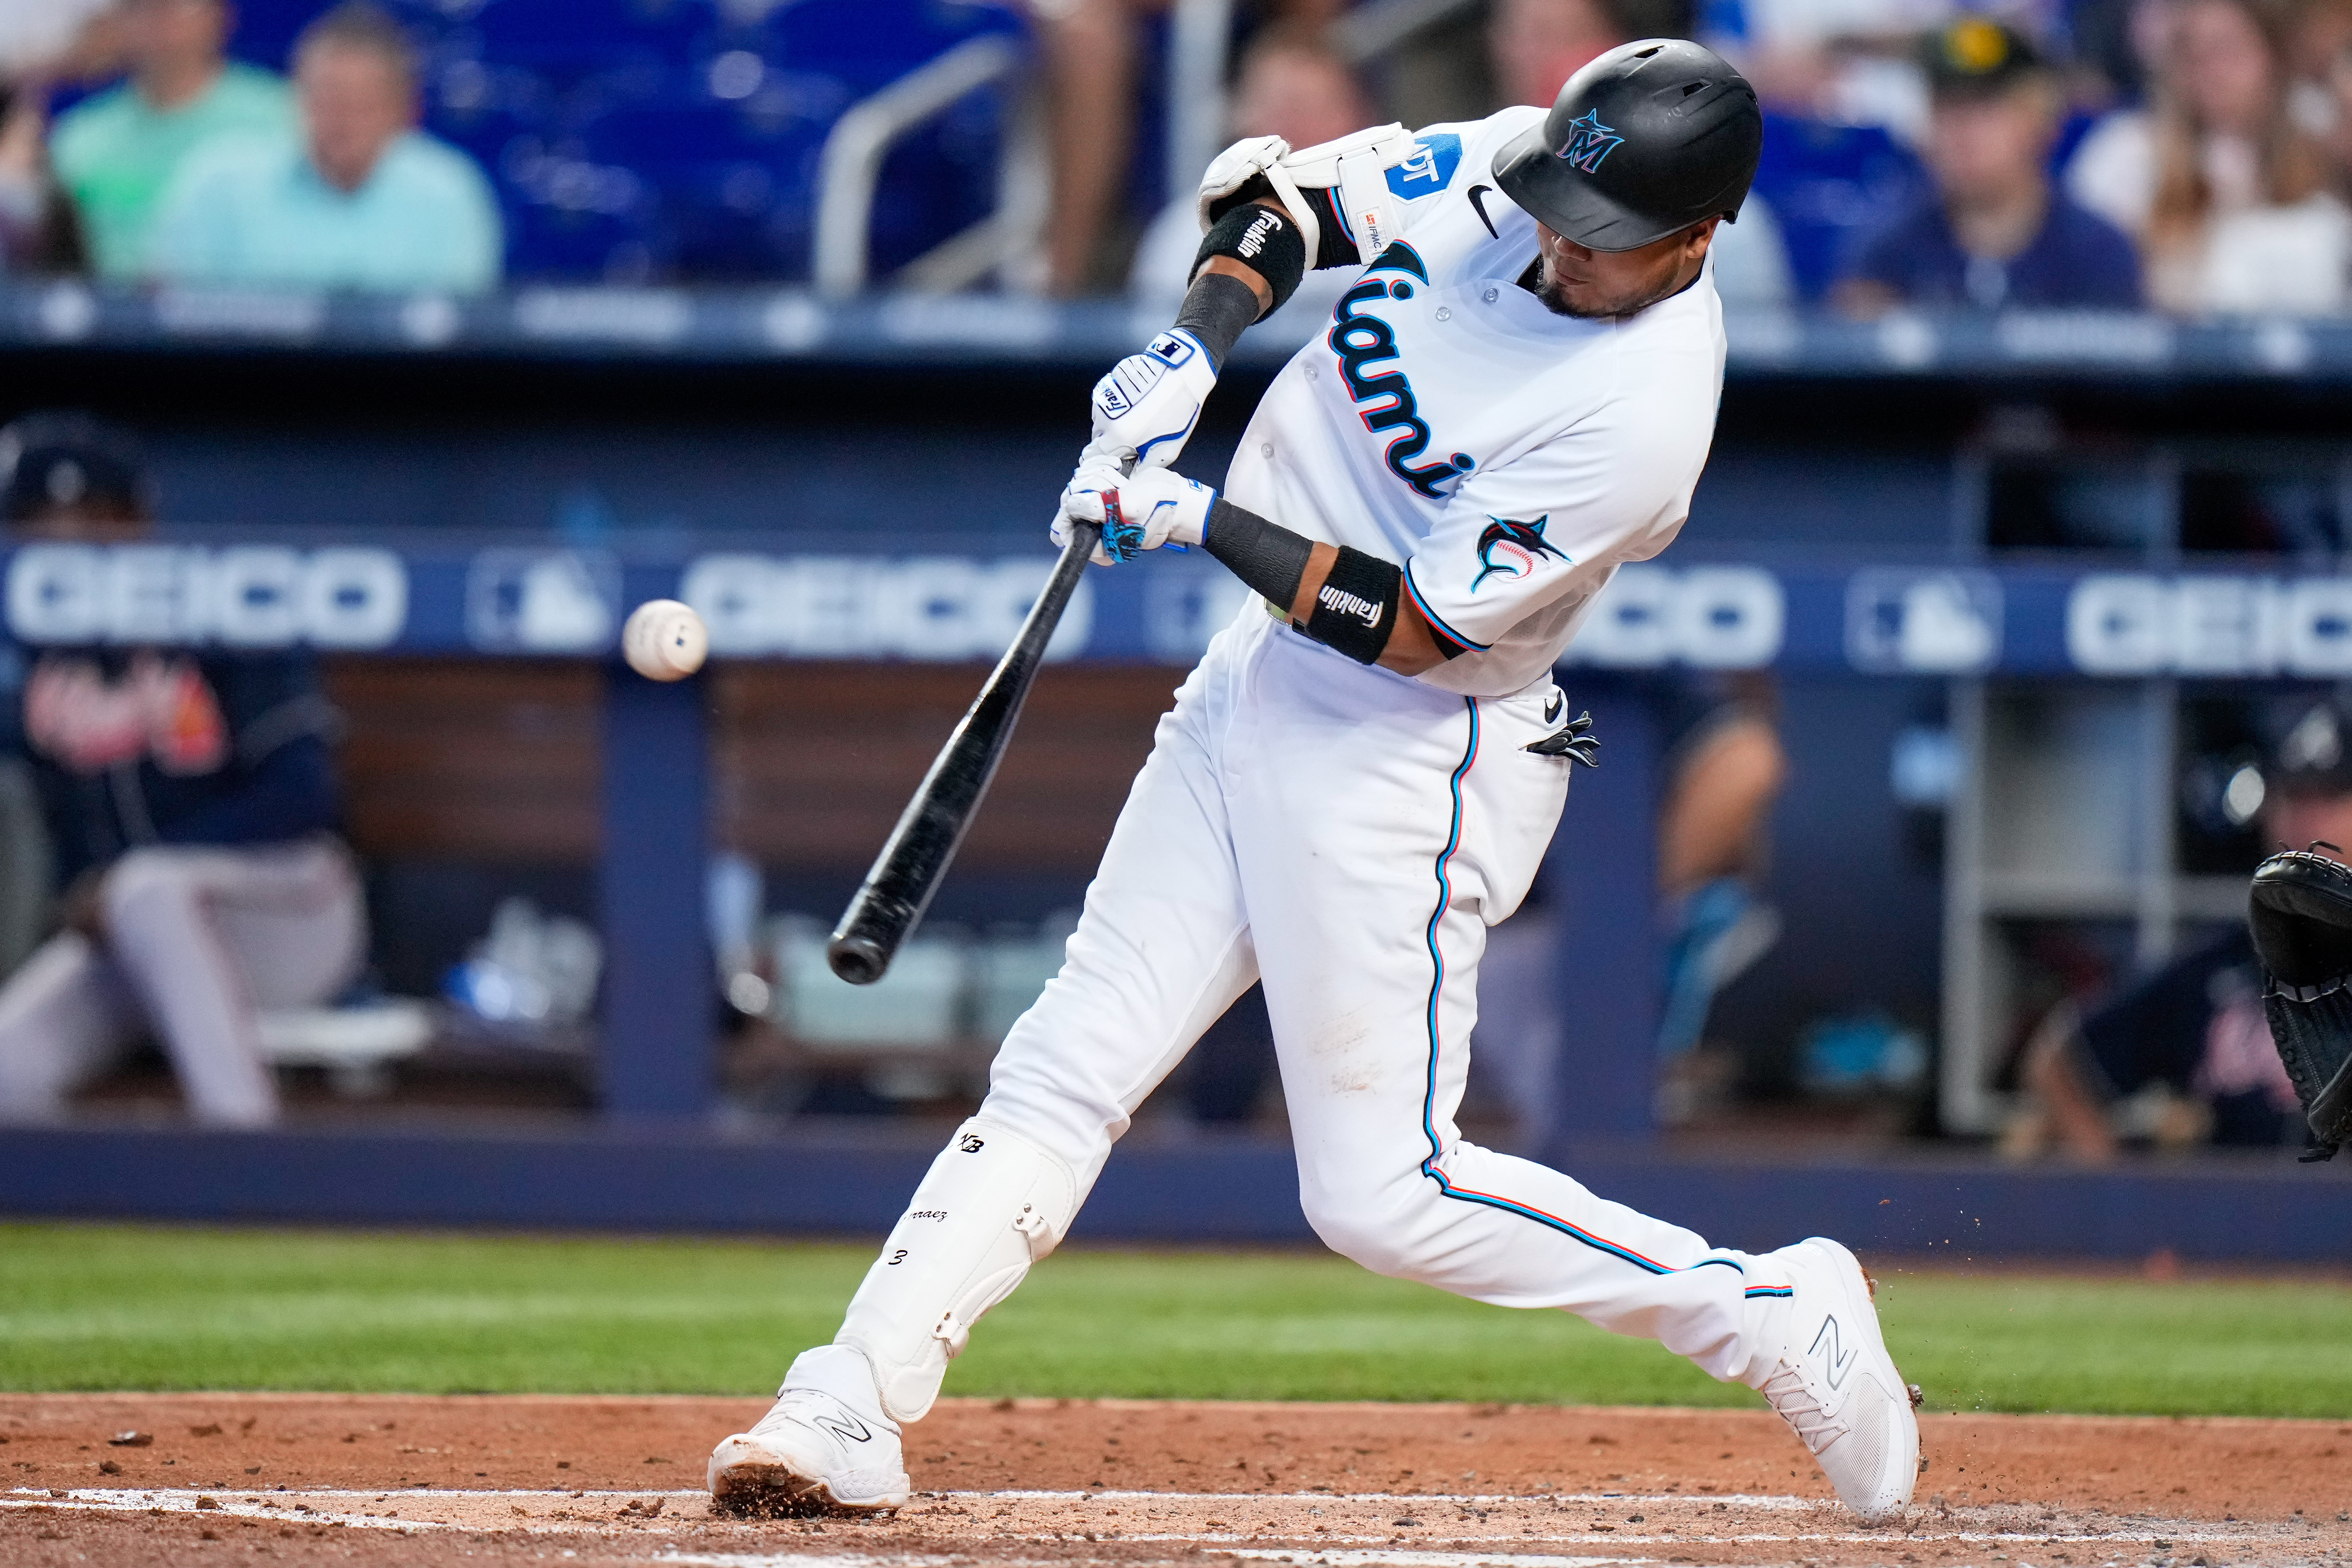 Miami Marlins second baseman Luis Arraez (3) hits a single against the Atlanta Braves during the third inning at loanDepot Park.